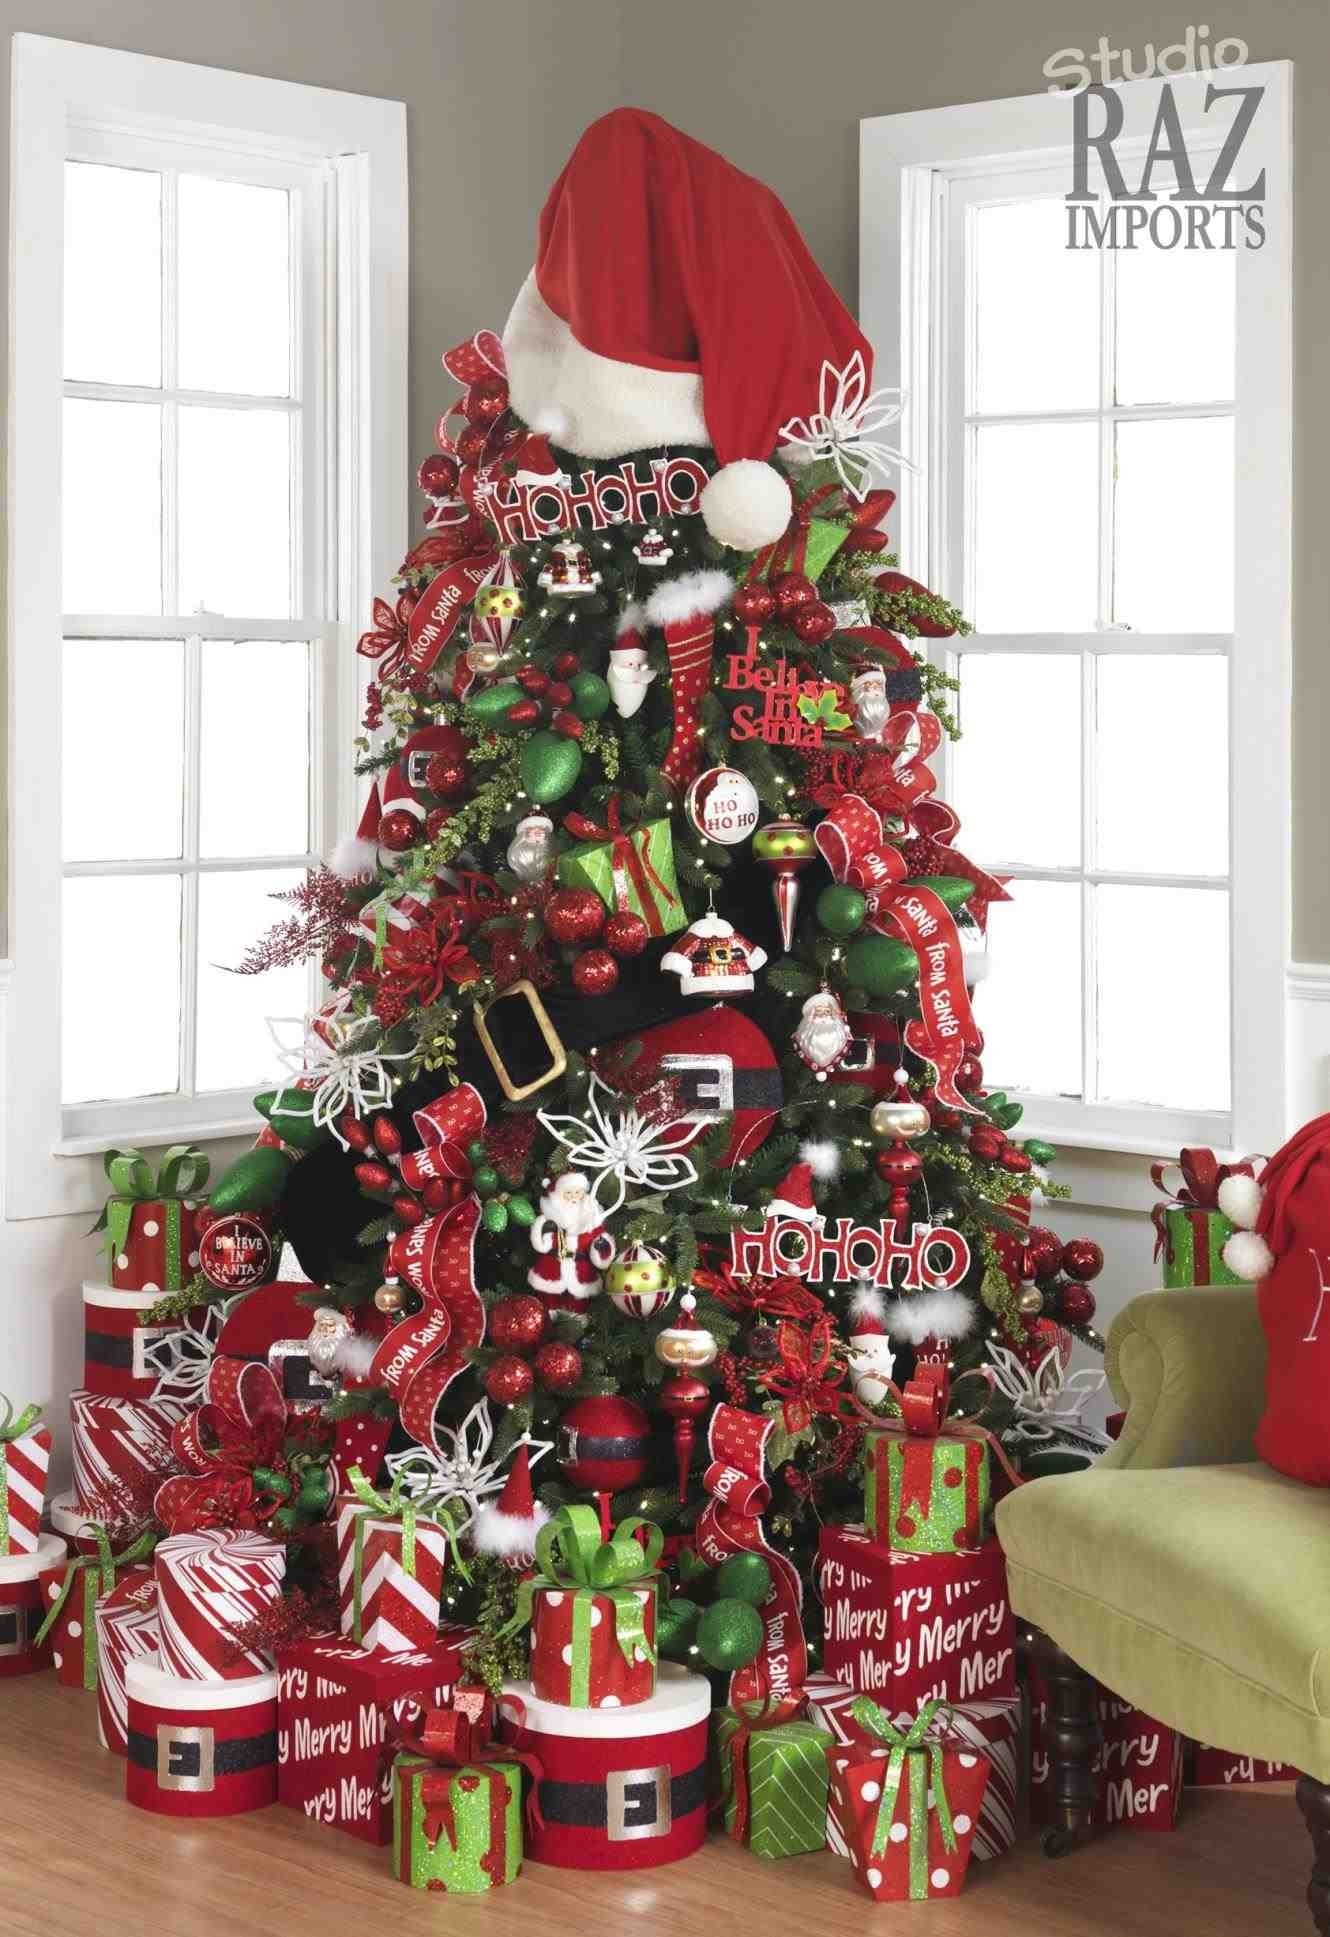 10 Stunning Red Green And Gold Christmas Tree Ideas white christmas tree with red and green decorations cheminee website 2022